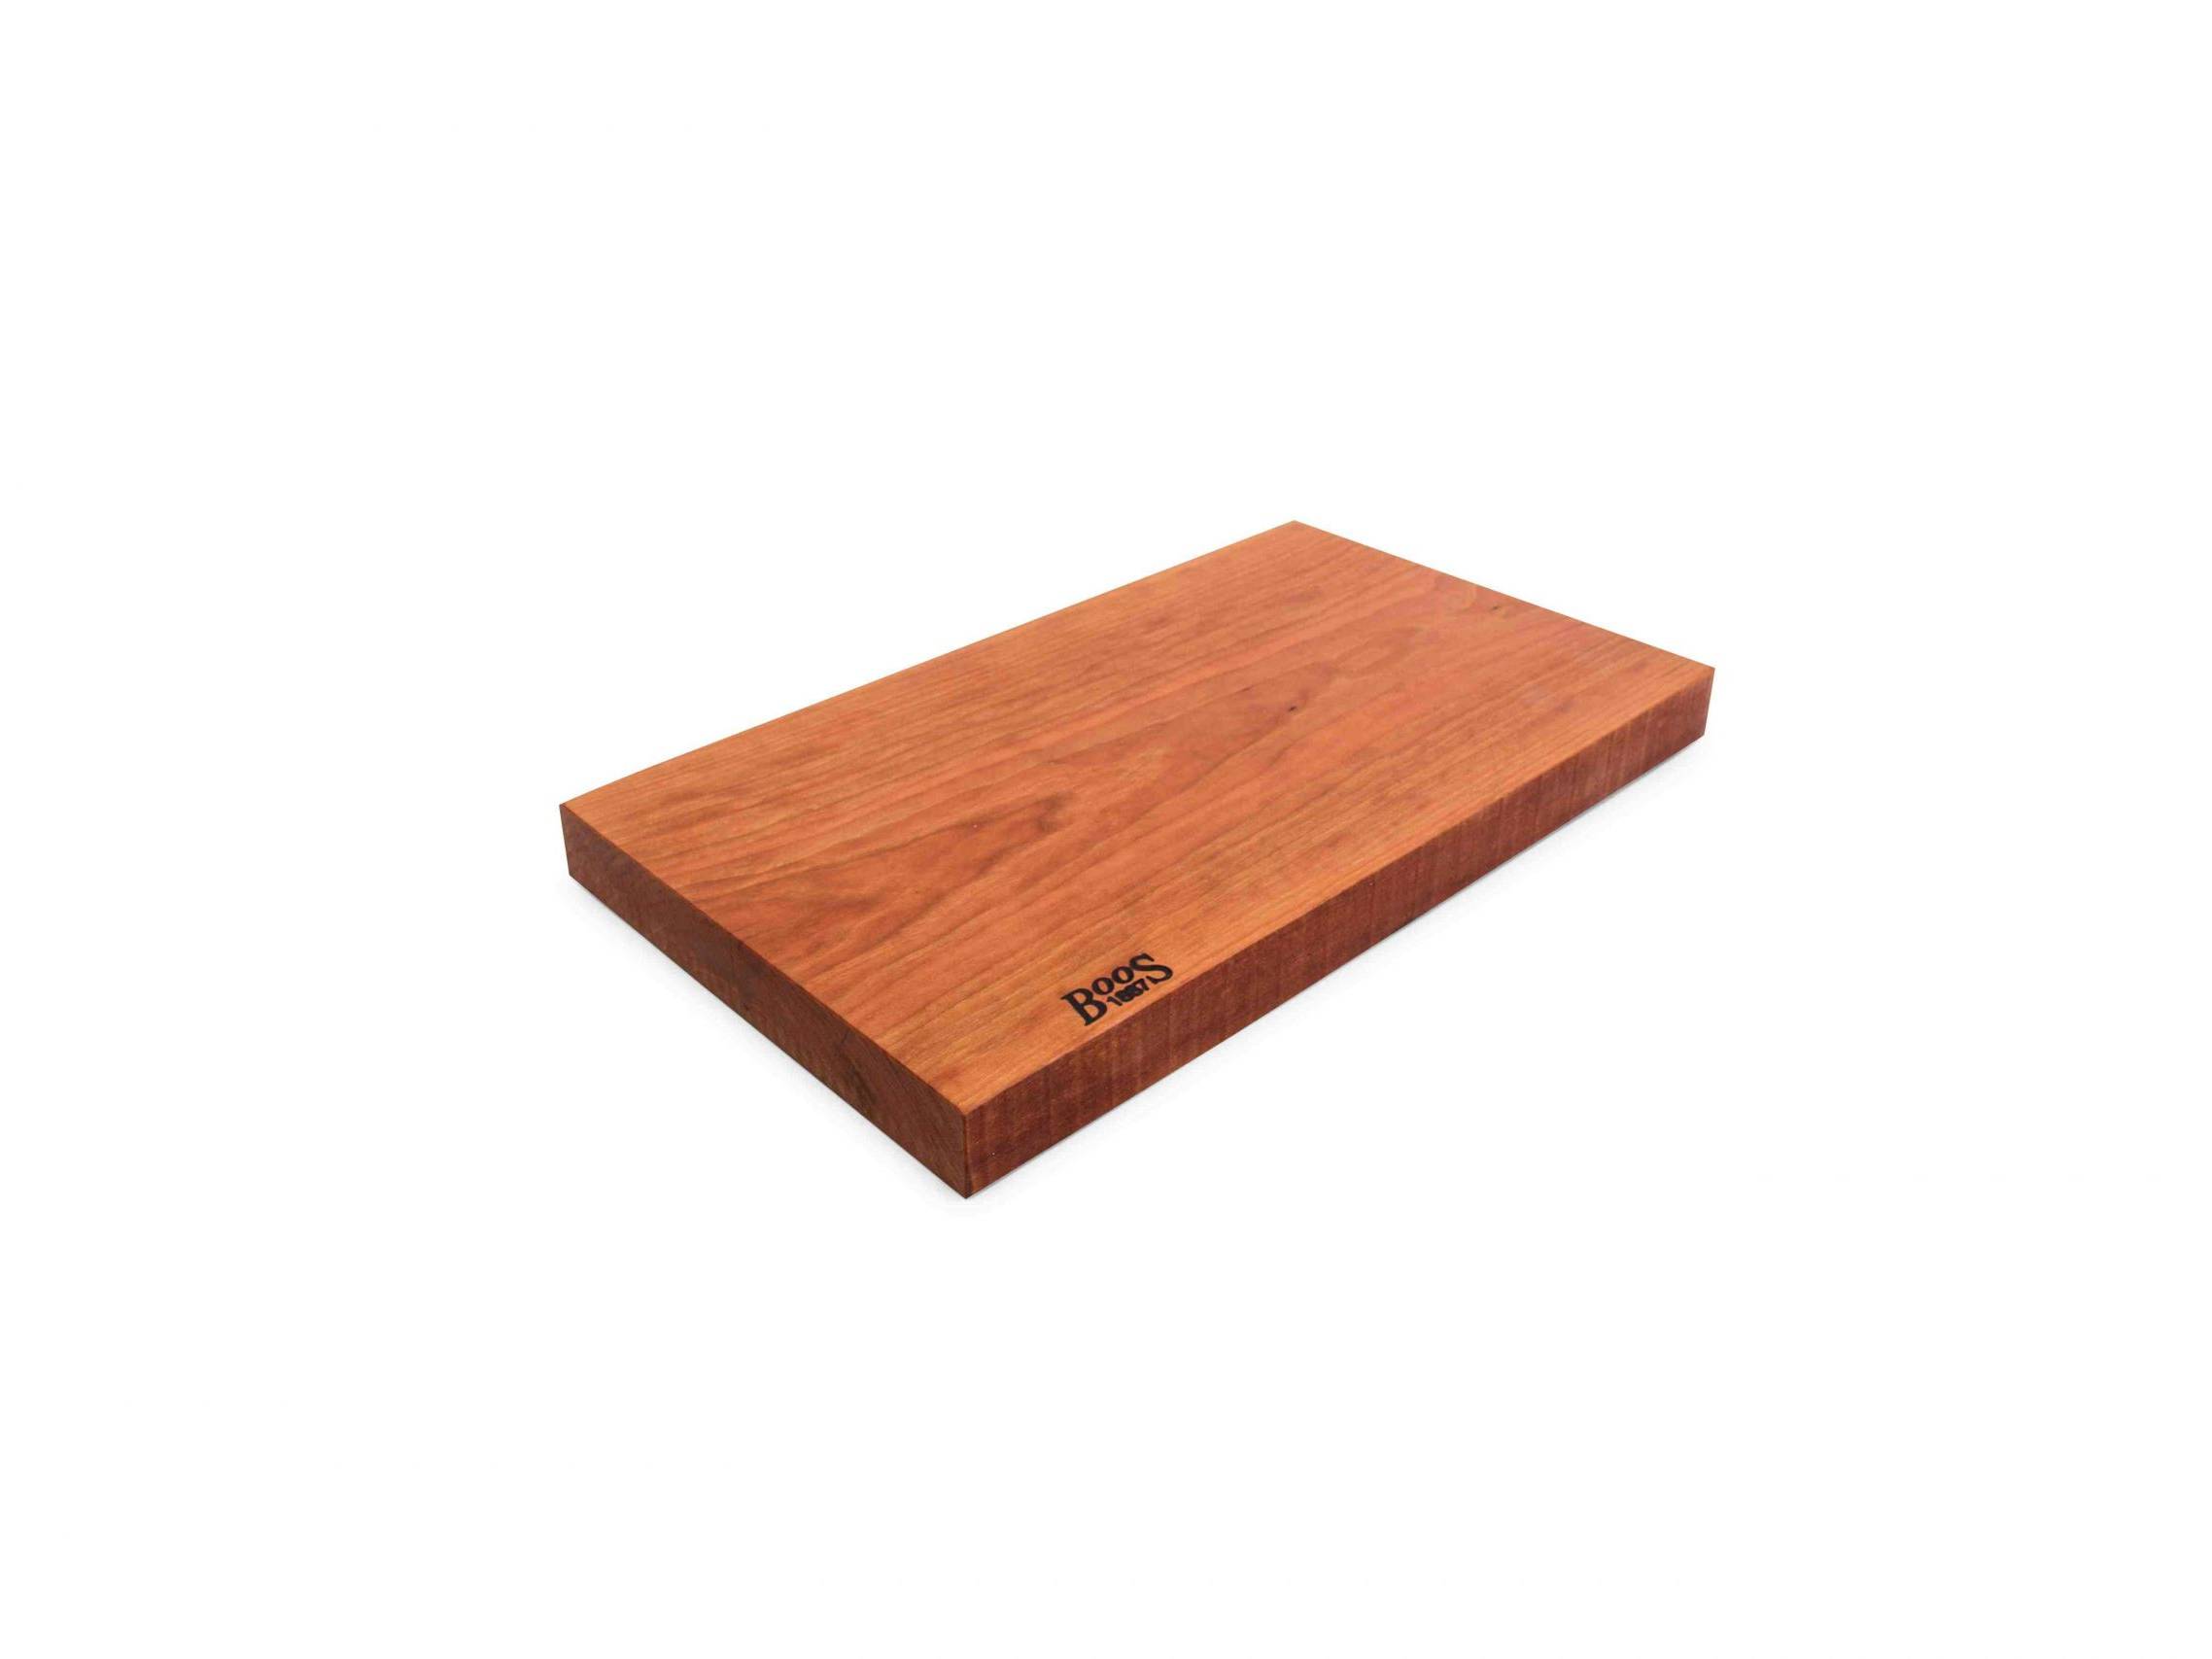 Boos 1887 / Rustic Edge one piece cutting board; American Cherry; can be used on both sides 7